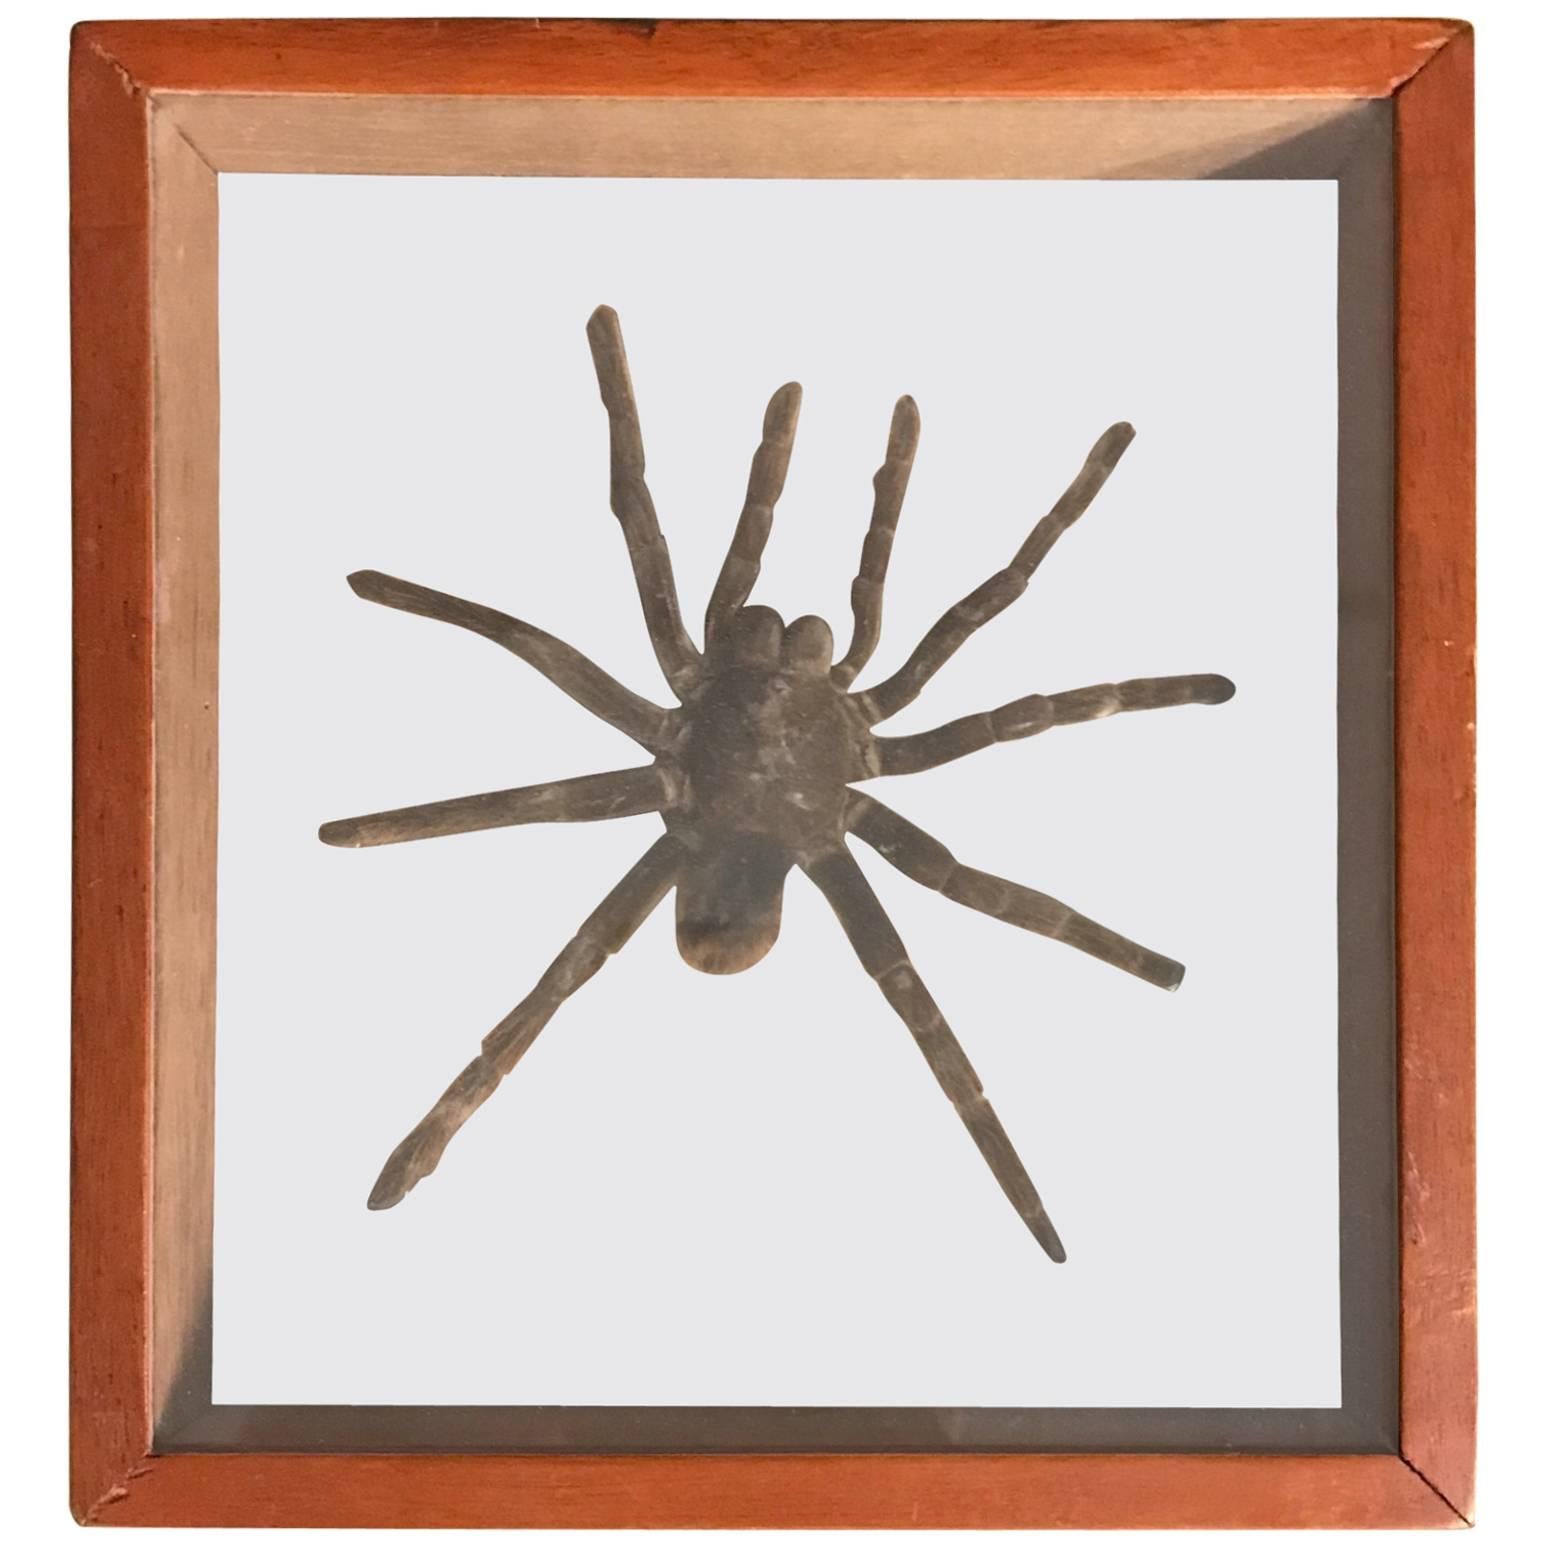 Boxed Display Tarantula Spider Taxidermy For Sale